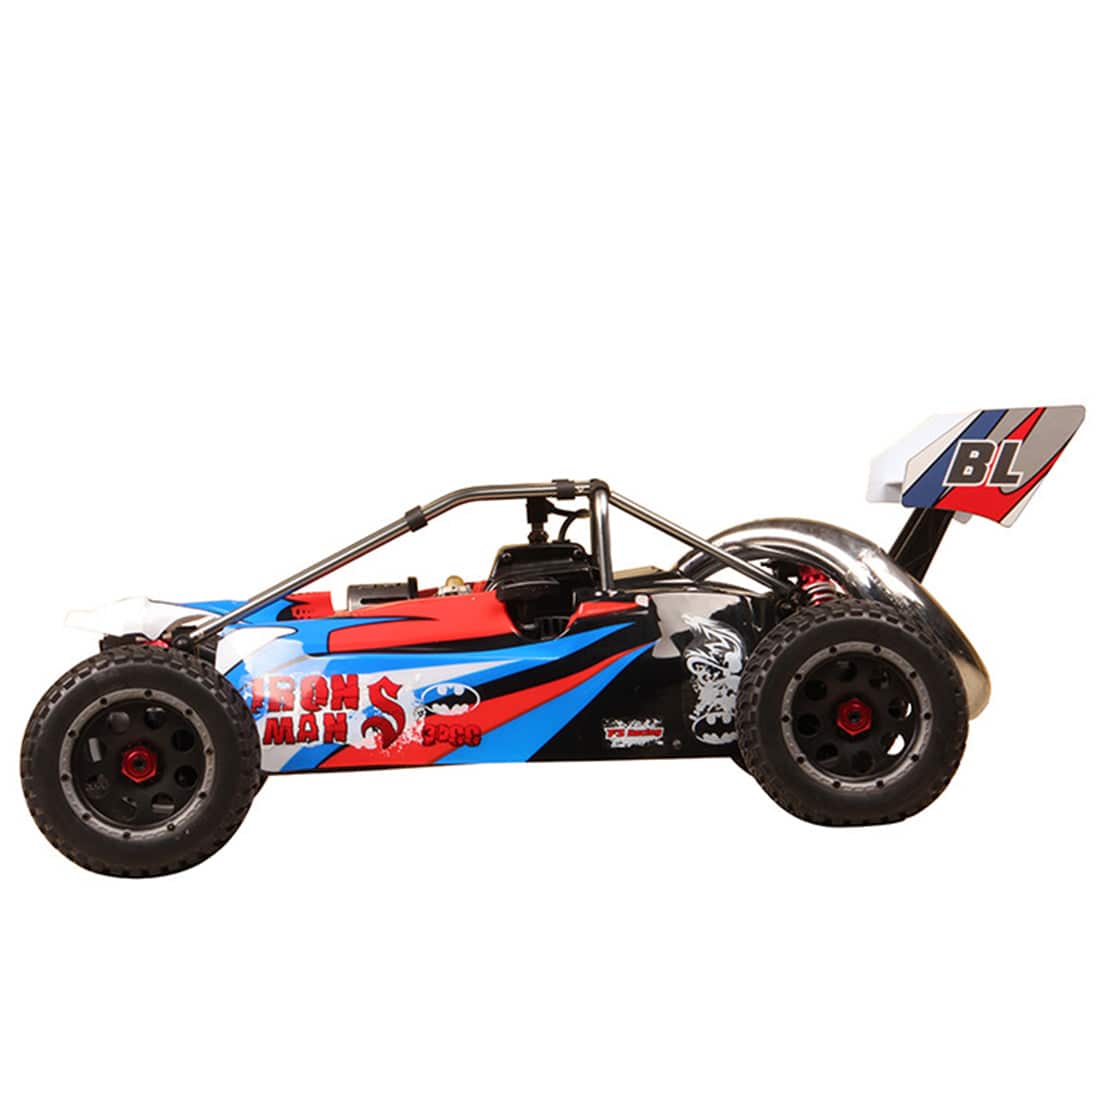 FS Racing 11203 1:5 2.4G RC Car 4WD RTR Monster Trucks with 30CC